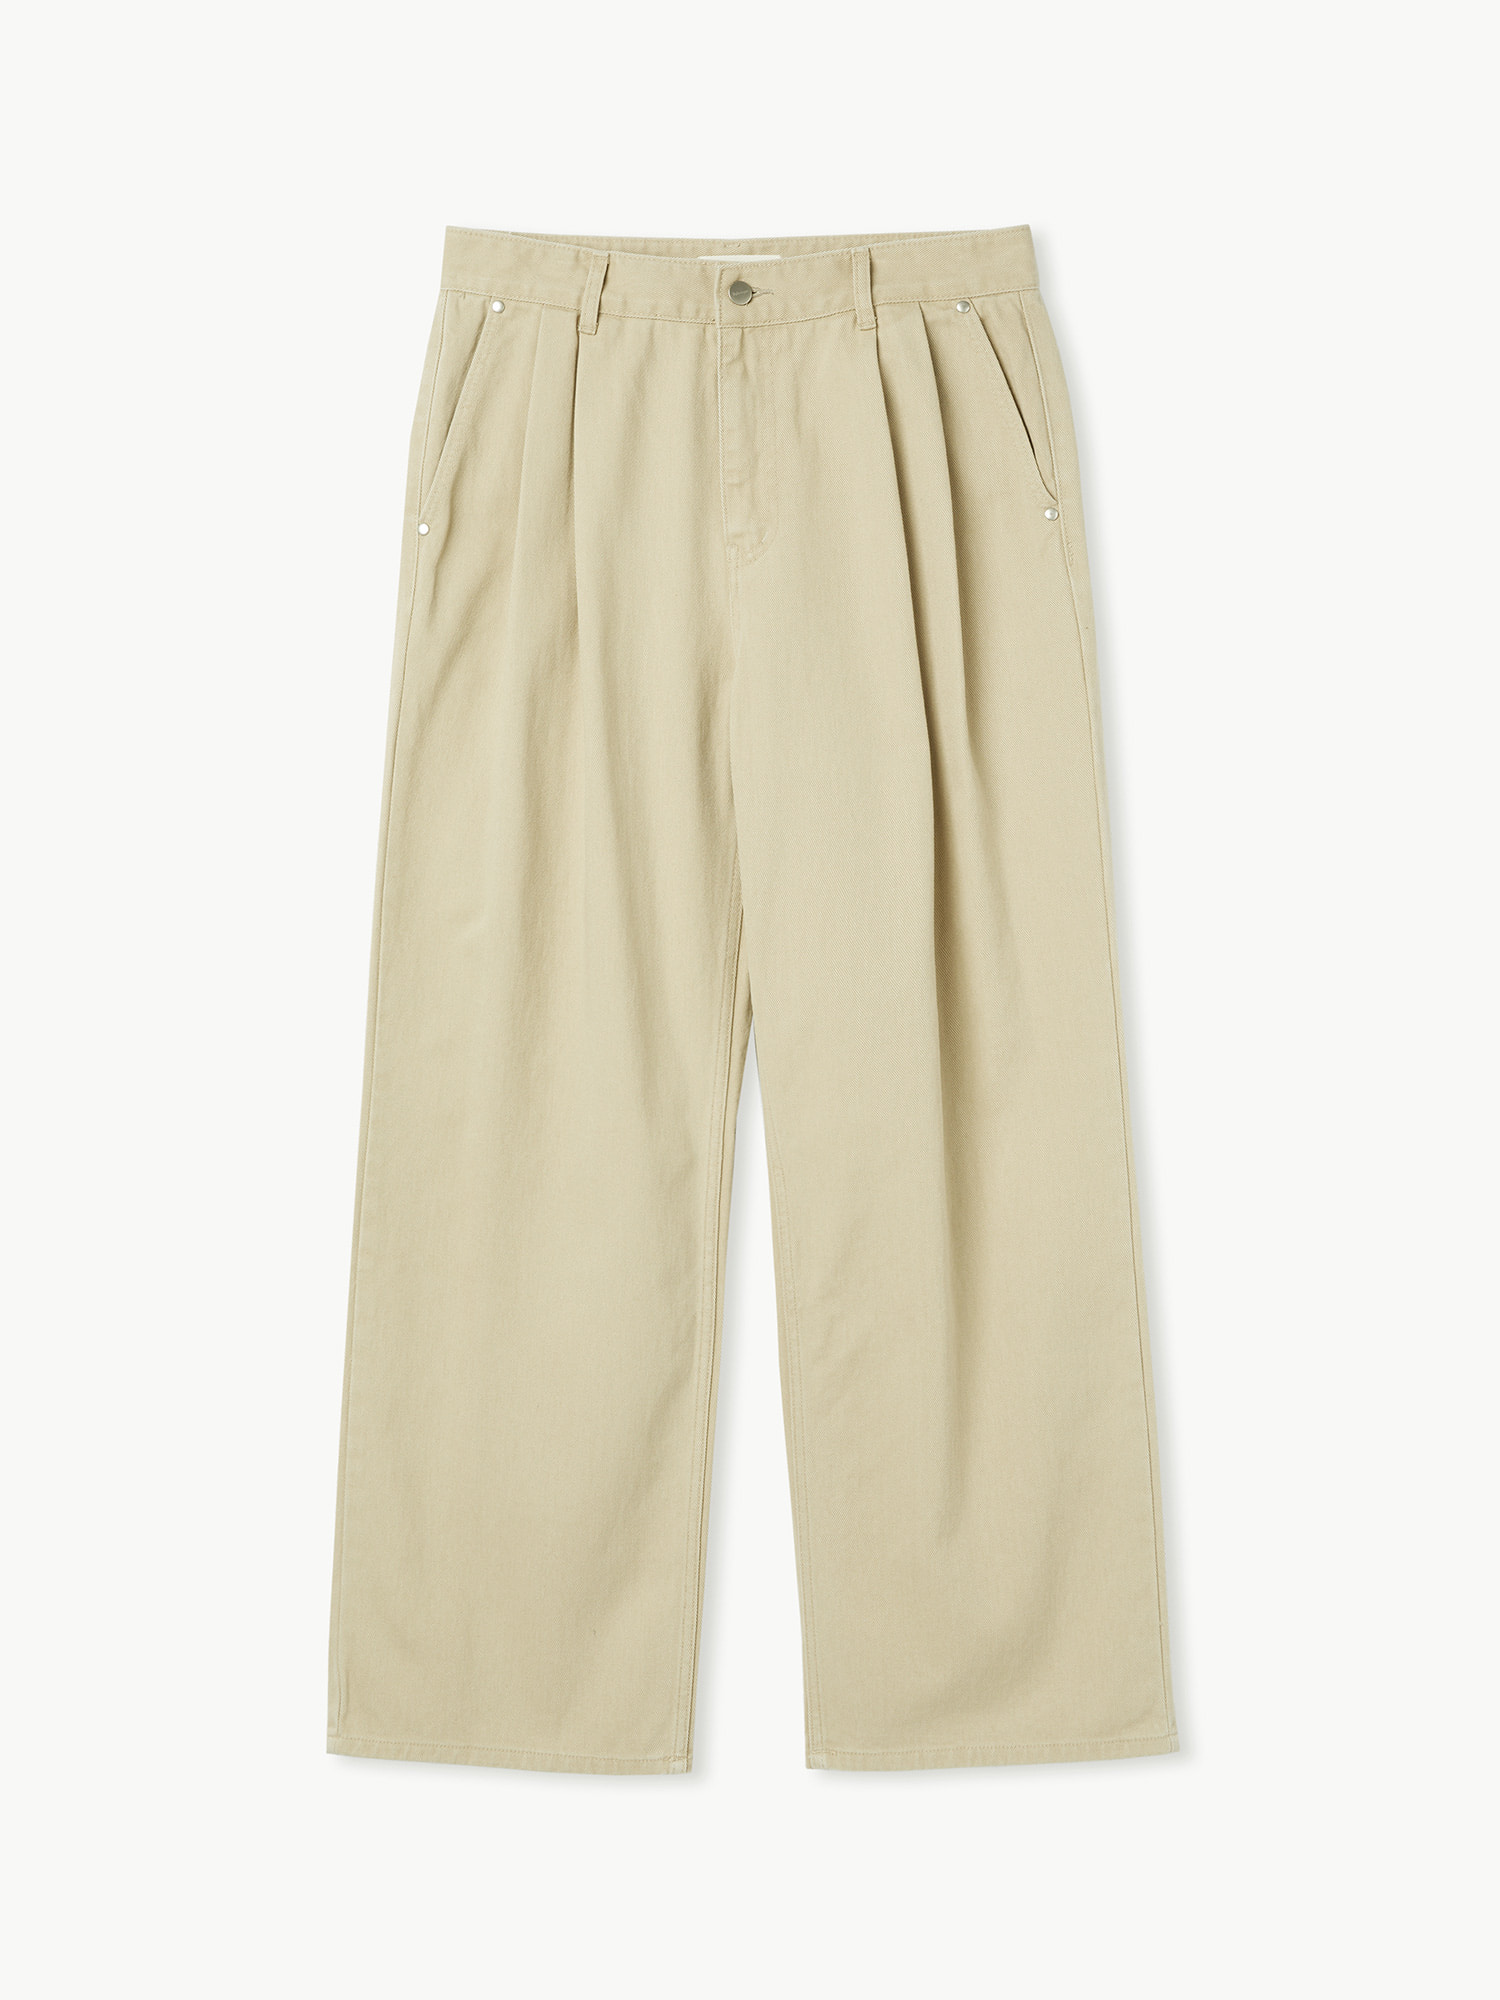 French Two Tuck Chino Pants (Classic Beige)